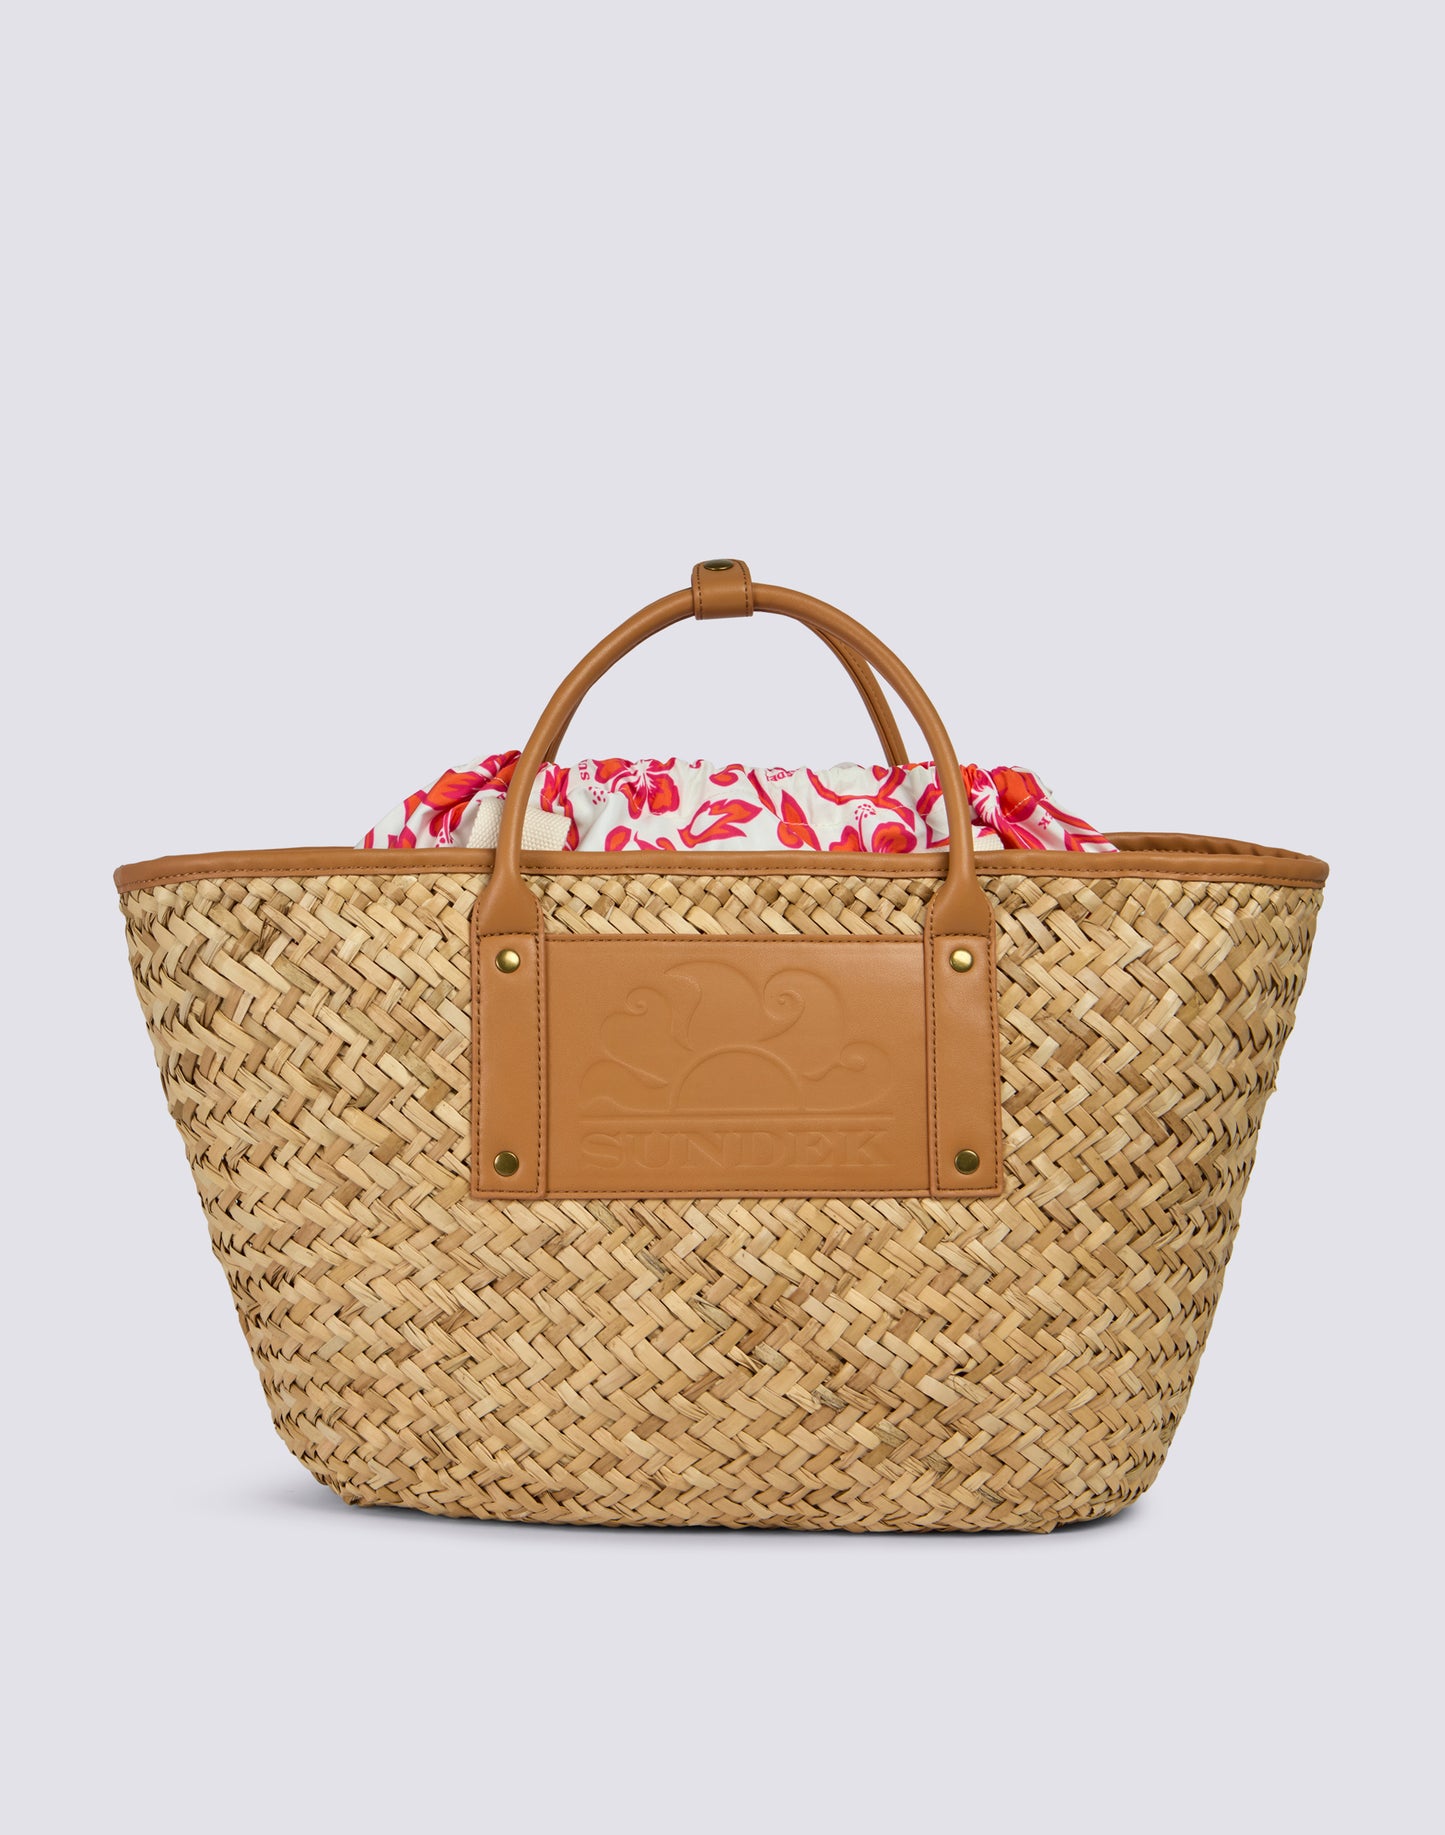 FRAN - LARGE TOTE BAG WITH CONTRAST DETAILS